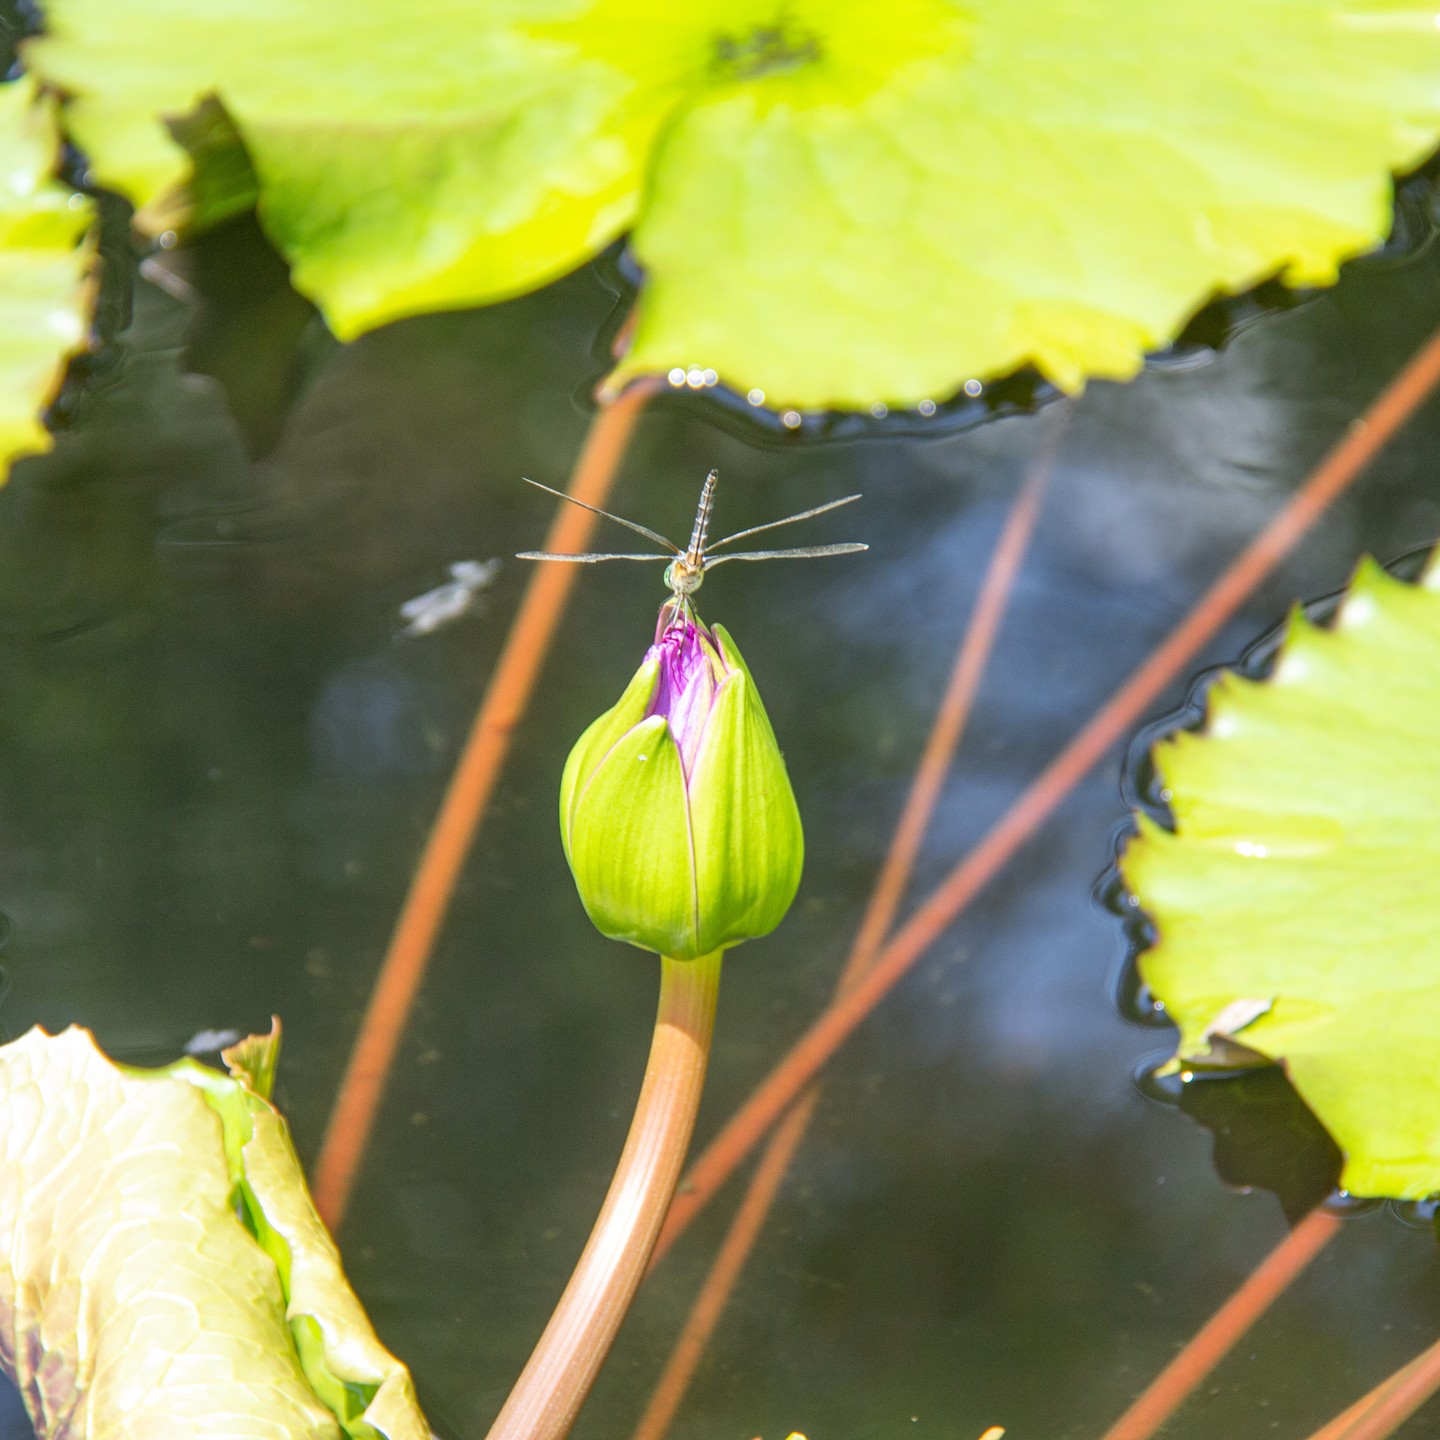 A dragonfly captured on water lily bud. This photo was taken at the Birmingham Botanical Gardens. 

@bbgardens #Birmingham #birminghambotanicalgardens #Alabama #visitalabama #explorealabama #dragonfly #waterlily #gardens #outdoors #natureisbeautiful #nature